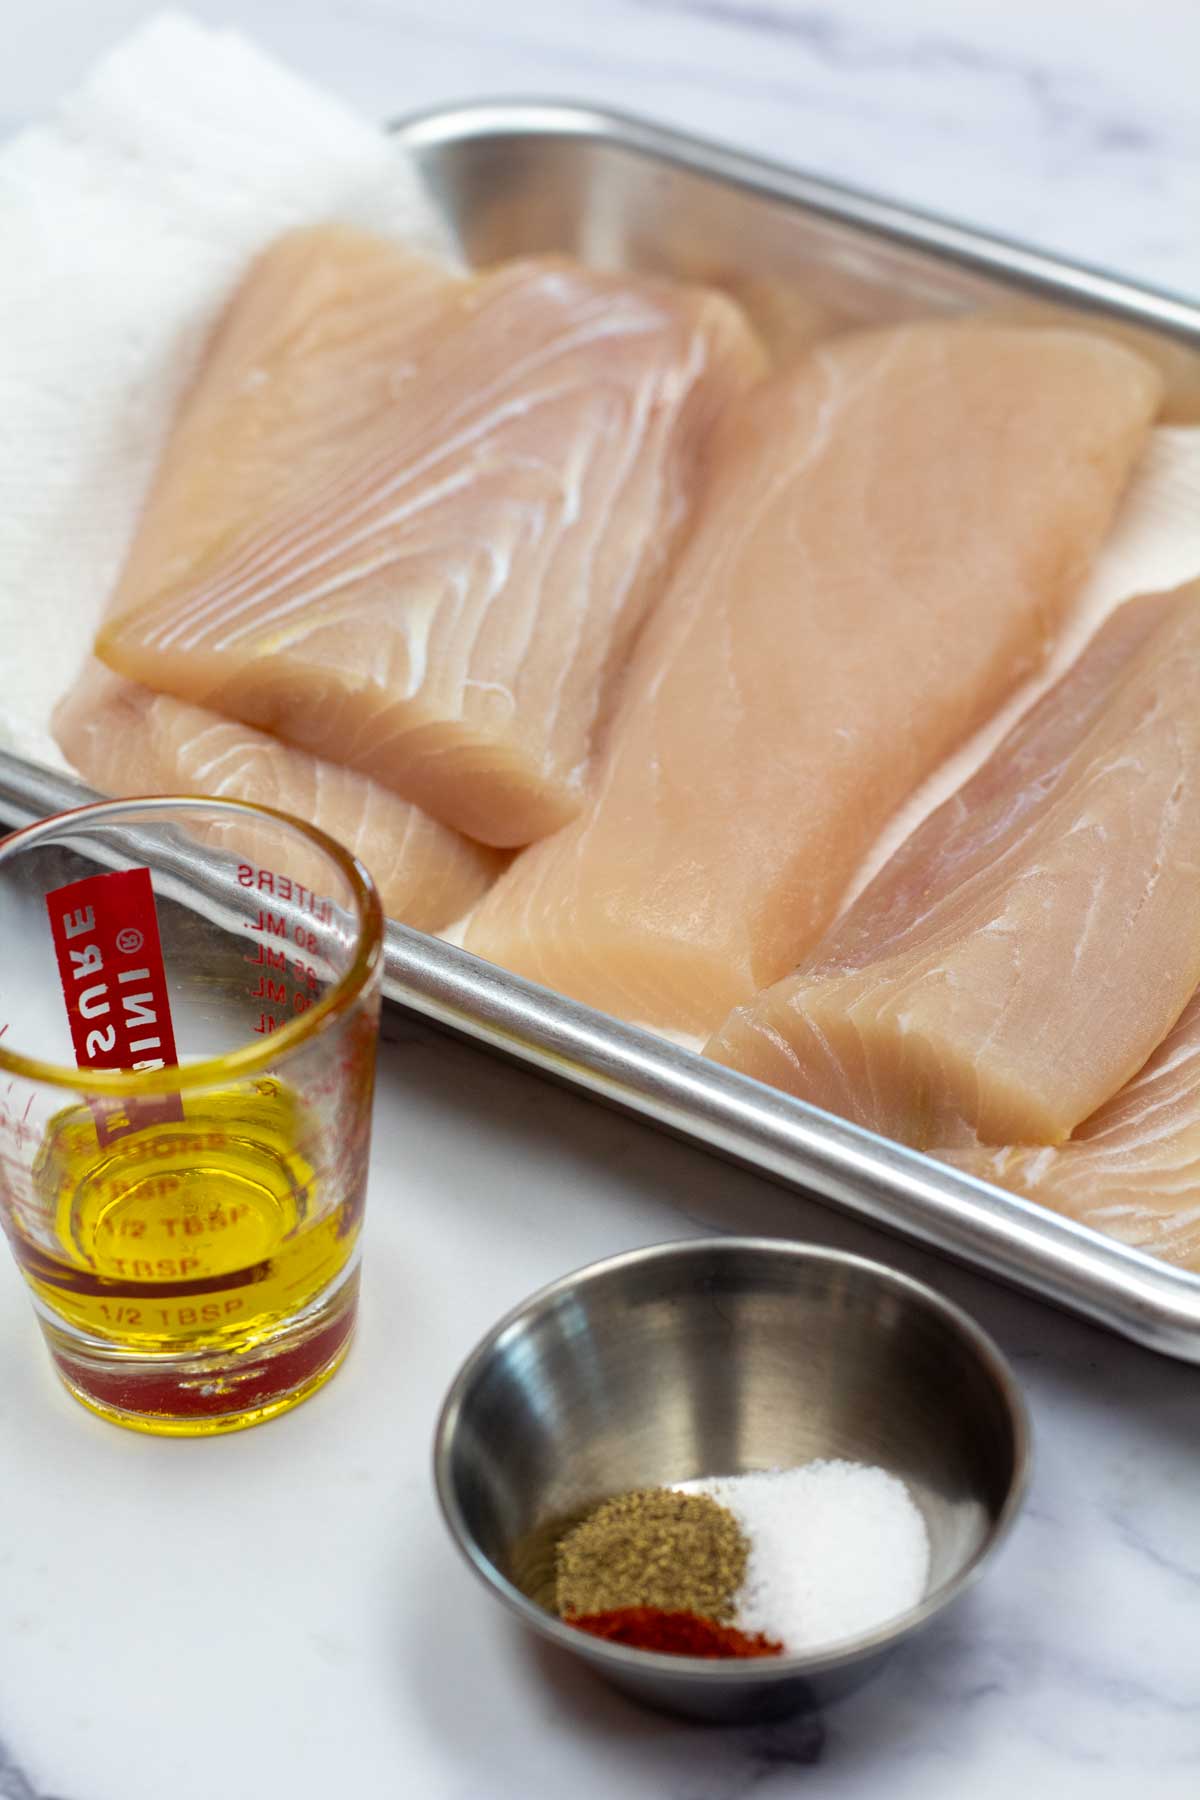 Tall image showing all the ingredients for broiled mahi mahi.